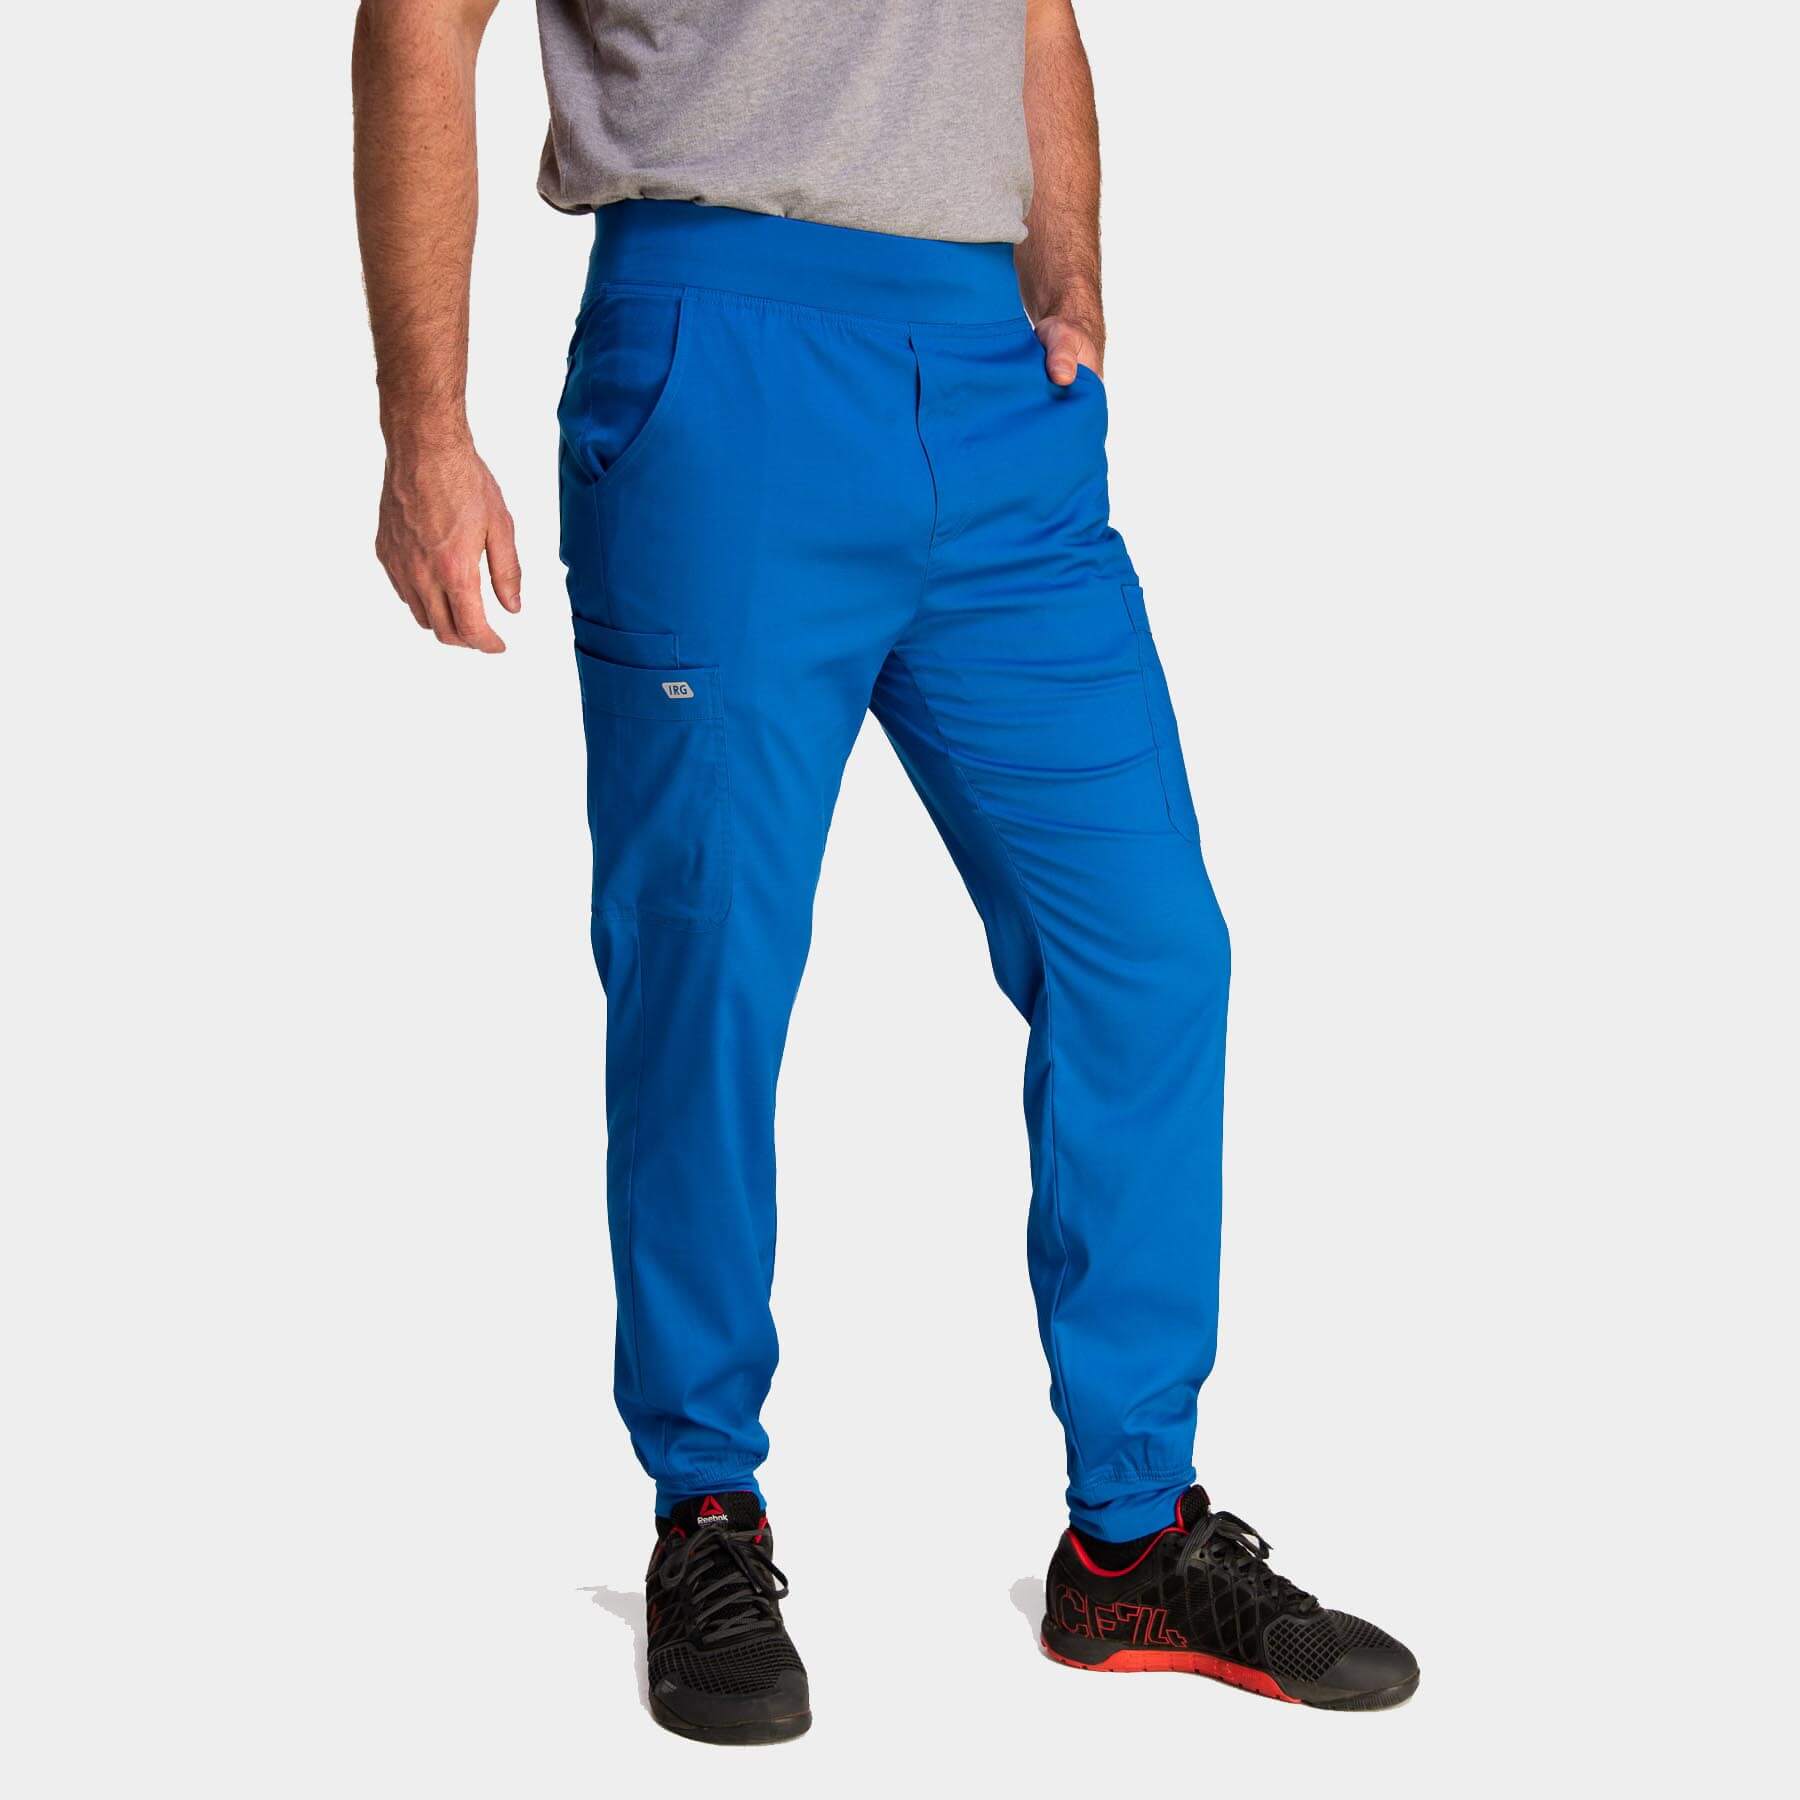 Buy Med Couture MC Activate Yoga 1 Cargo Pocket Pant - Med Couture